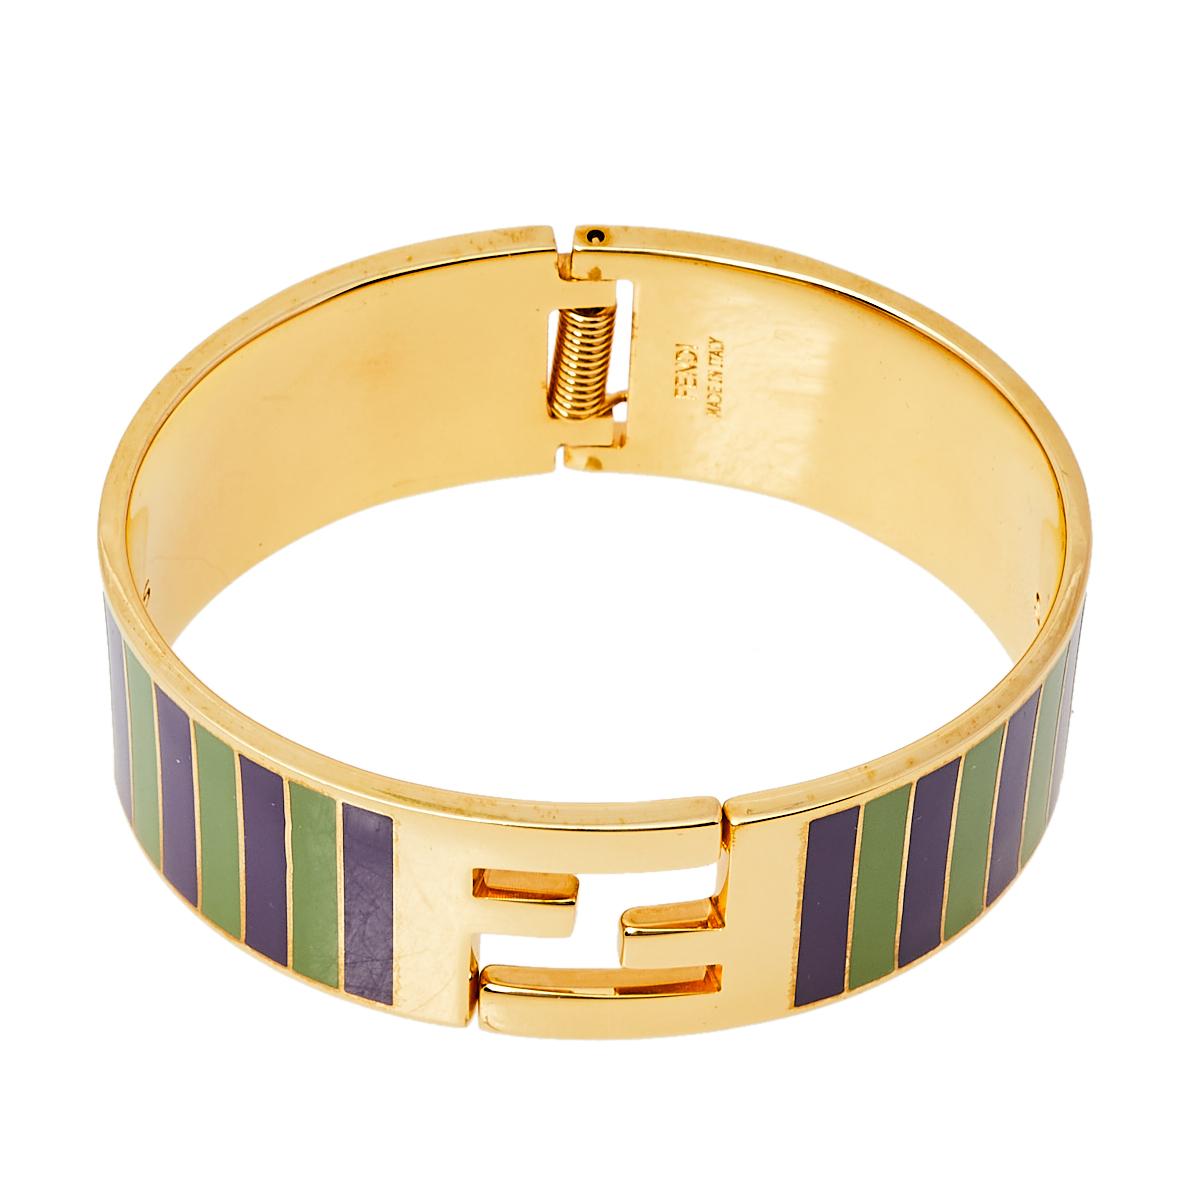 Fendi has always strived to bring out something new and different, and this bracelet is no exception. Exquisitely crafted from gold-tone metal, this stunning creation features green and purple enamel stripes on the exterior and the signature FF